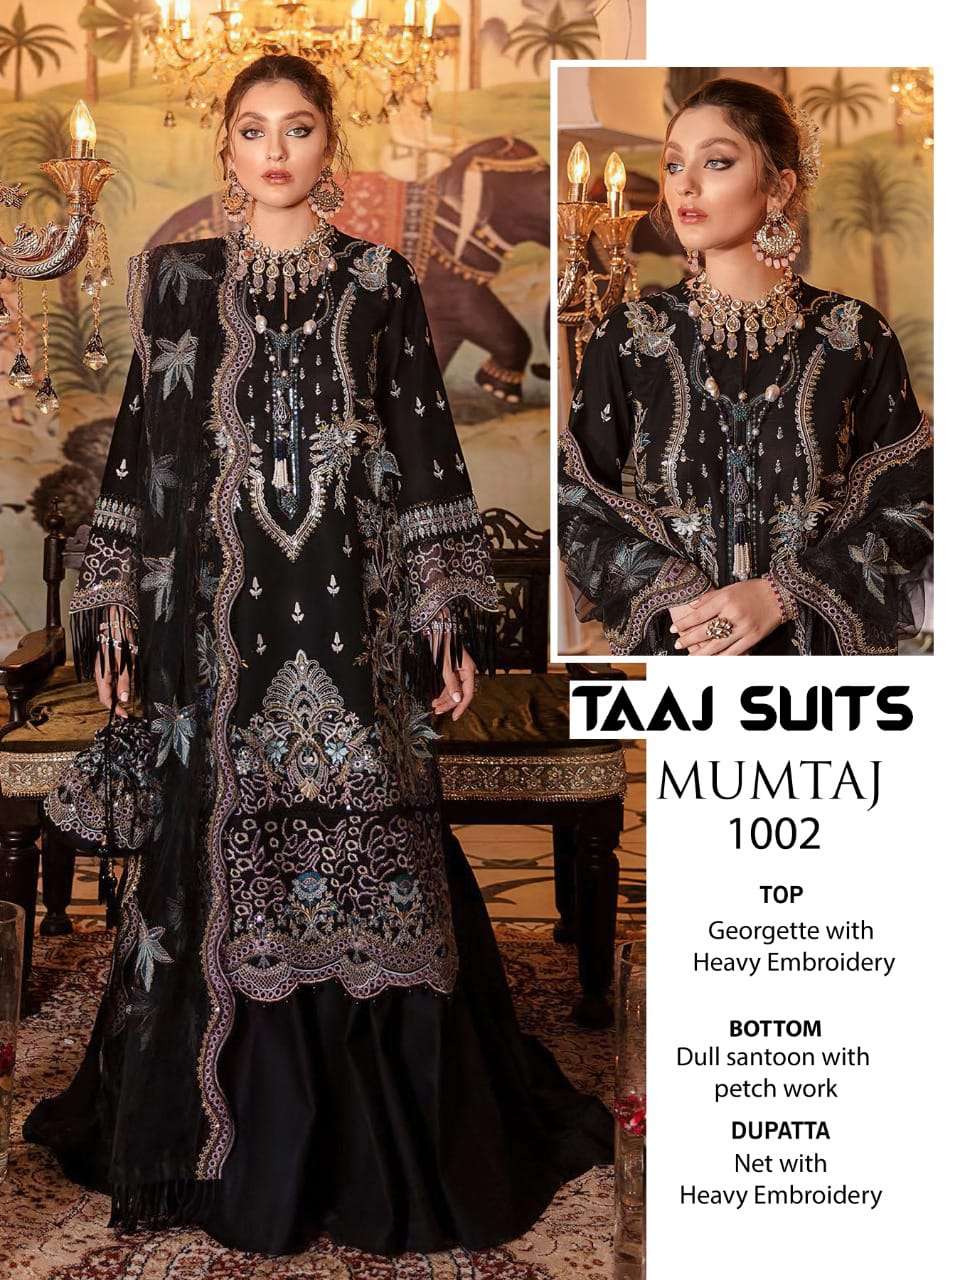 MUMTAZ BY TAAJ SUITS 1001 TO 1003 SERIES BEAUTIFUL PAKISTANI SUITS COLORFUL STYLISH FANCY CASUAL WEAR & ETHNIC WEAR GEORGETTE EMBROIDERED DRESSES AT WHOLESALE PRICE